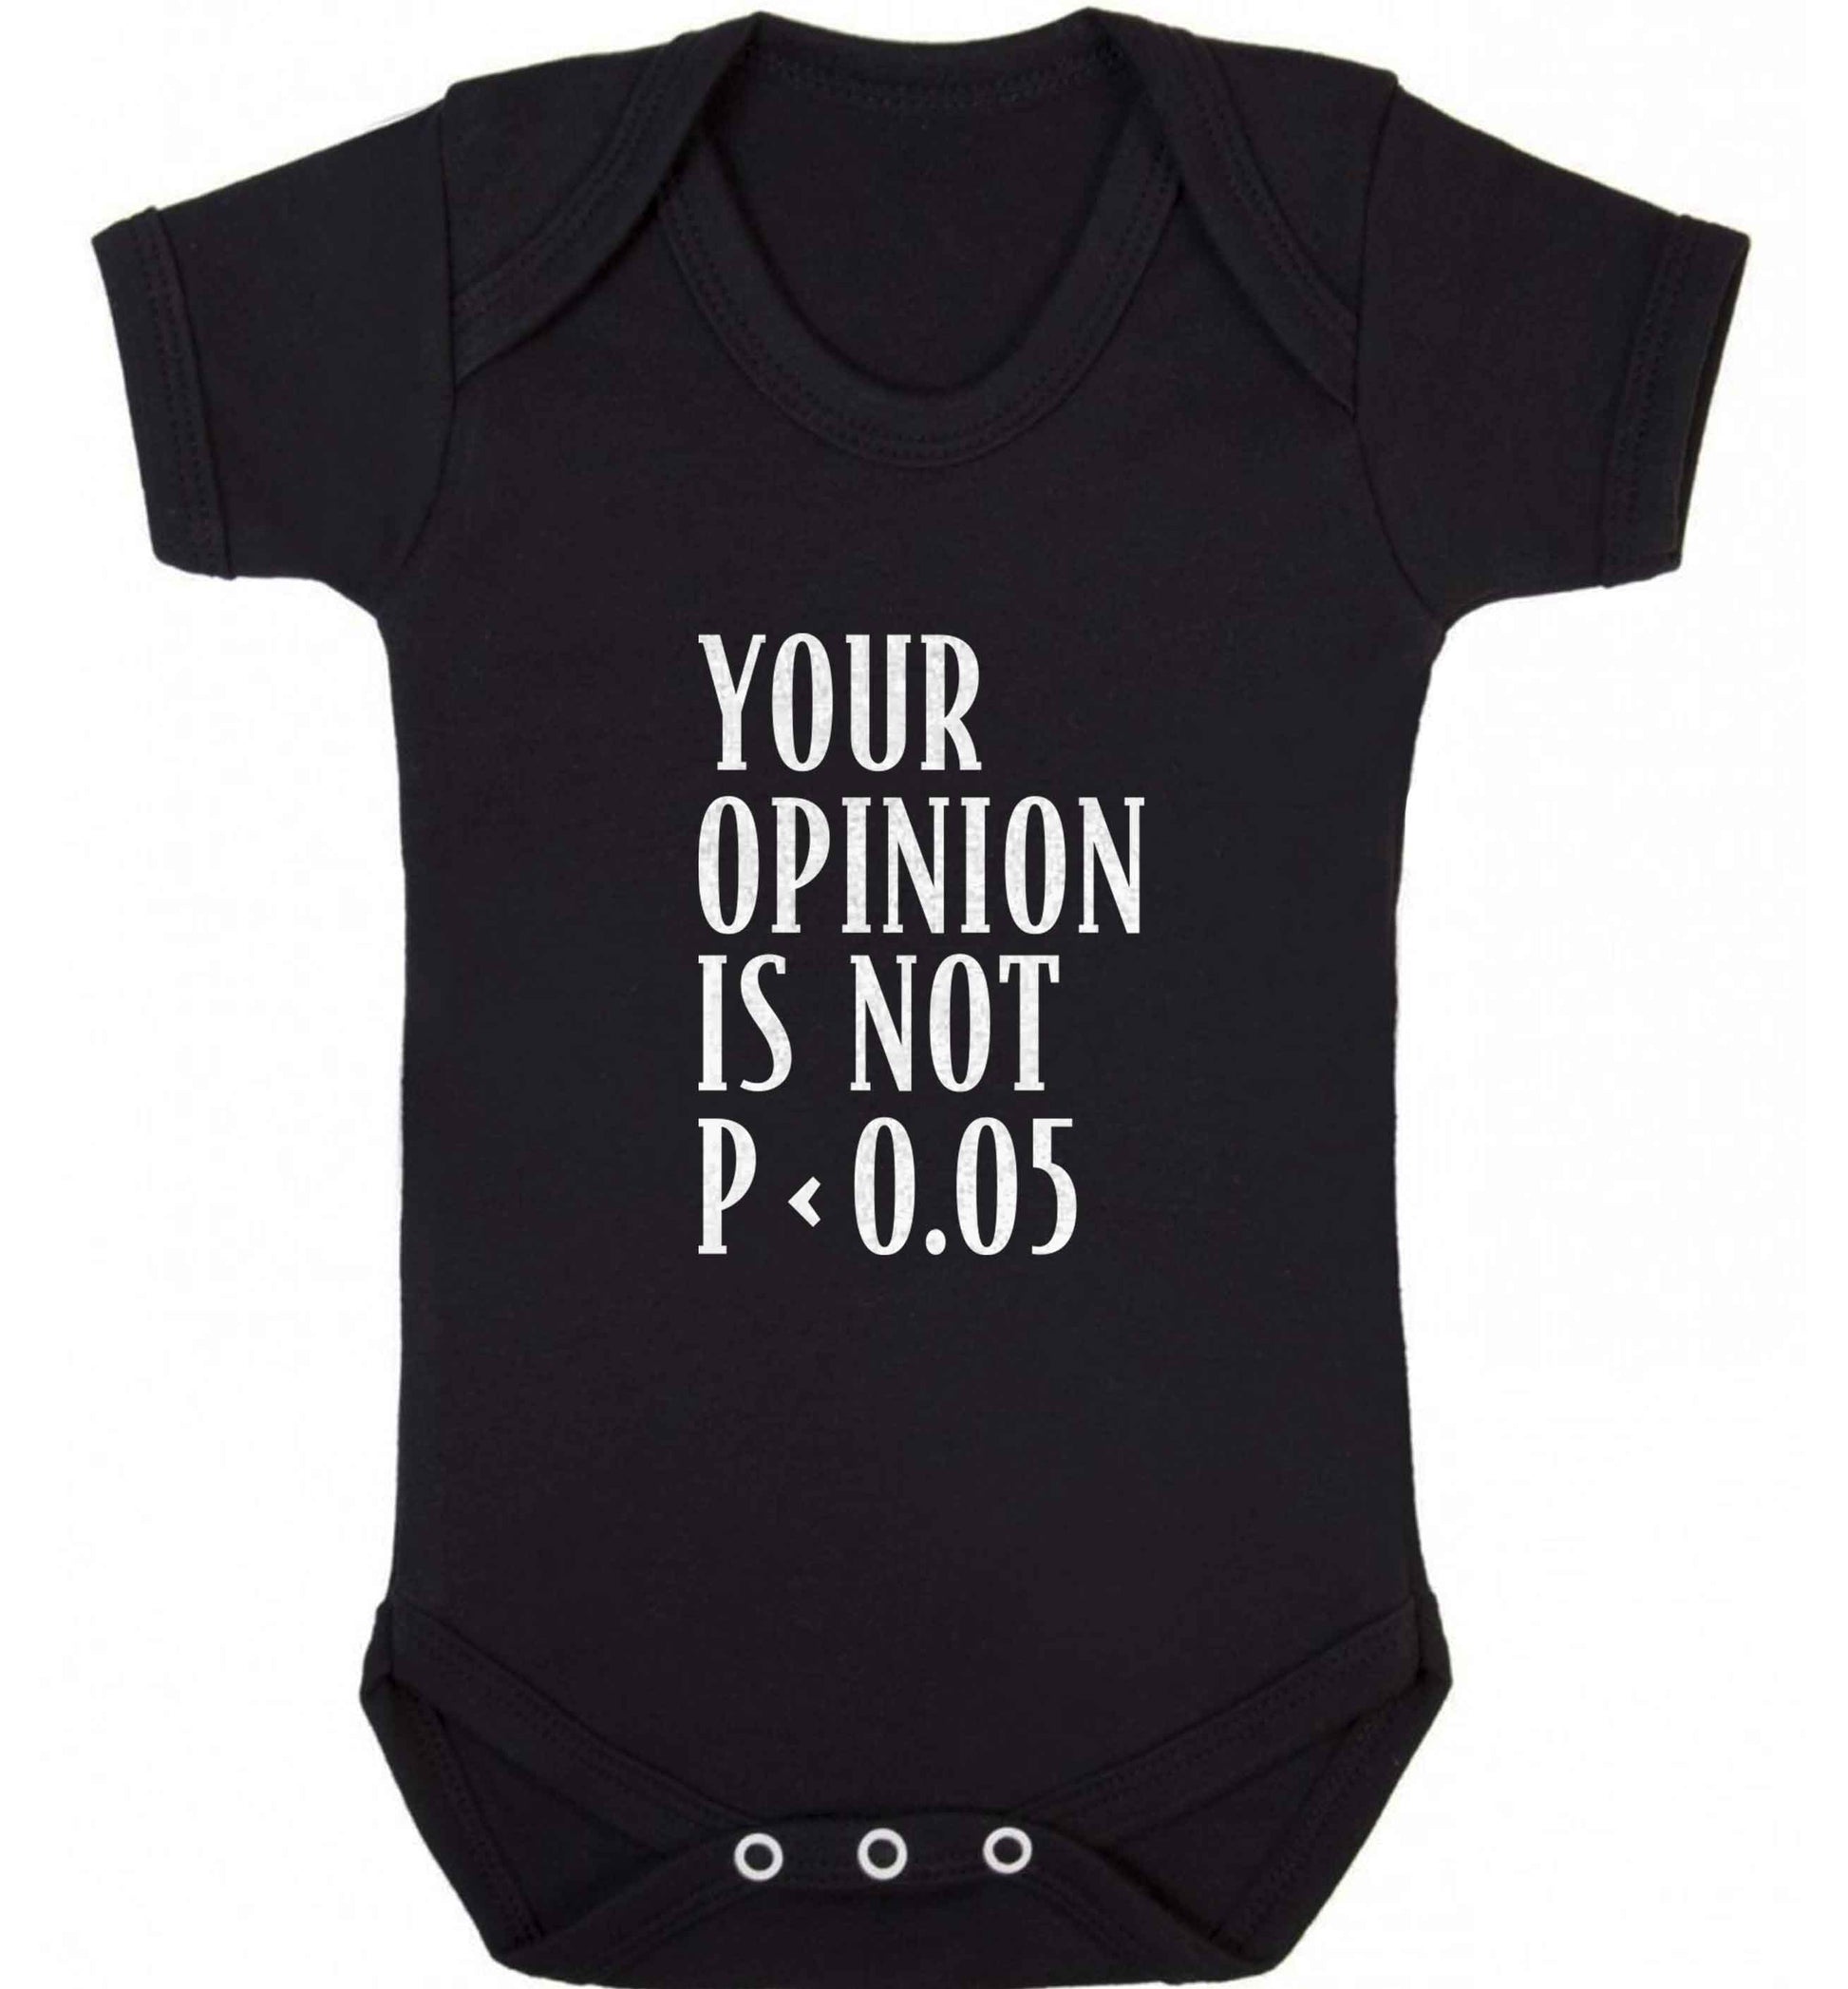 Your opinion is not P < 0.05baby vest black 18-24 months